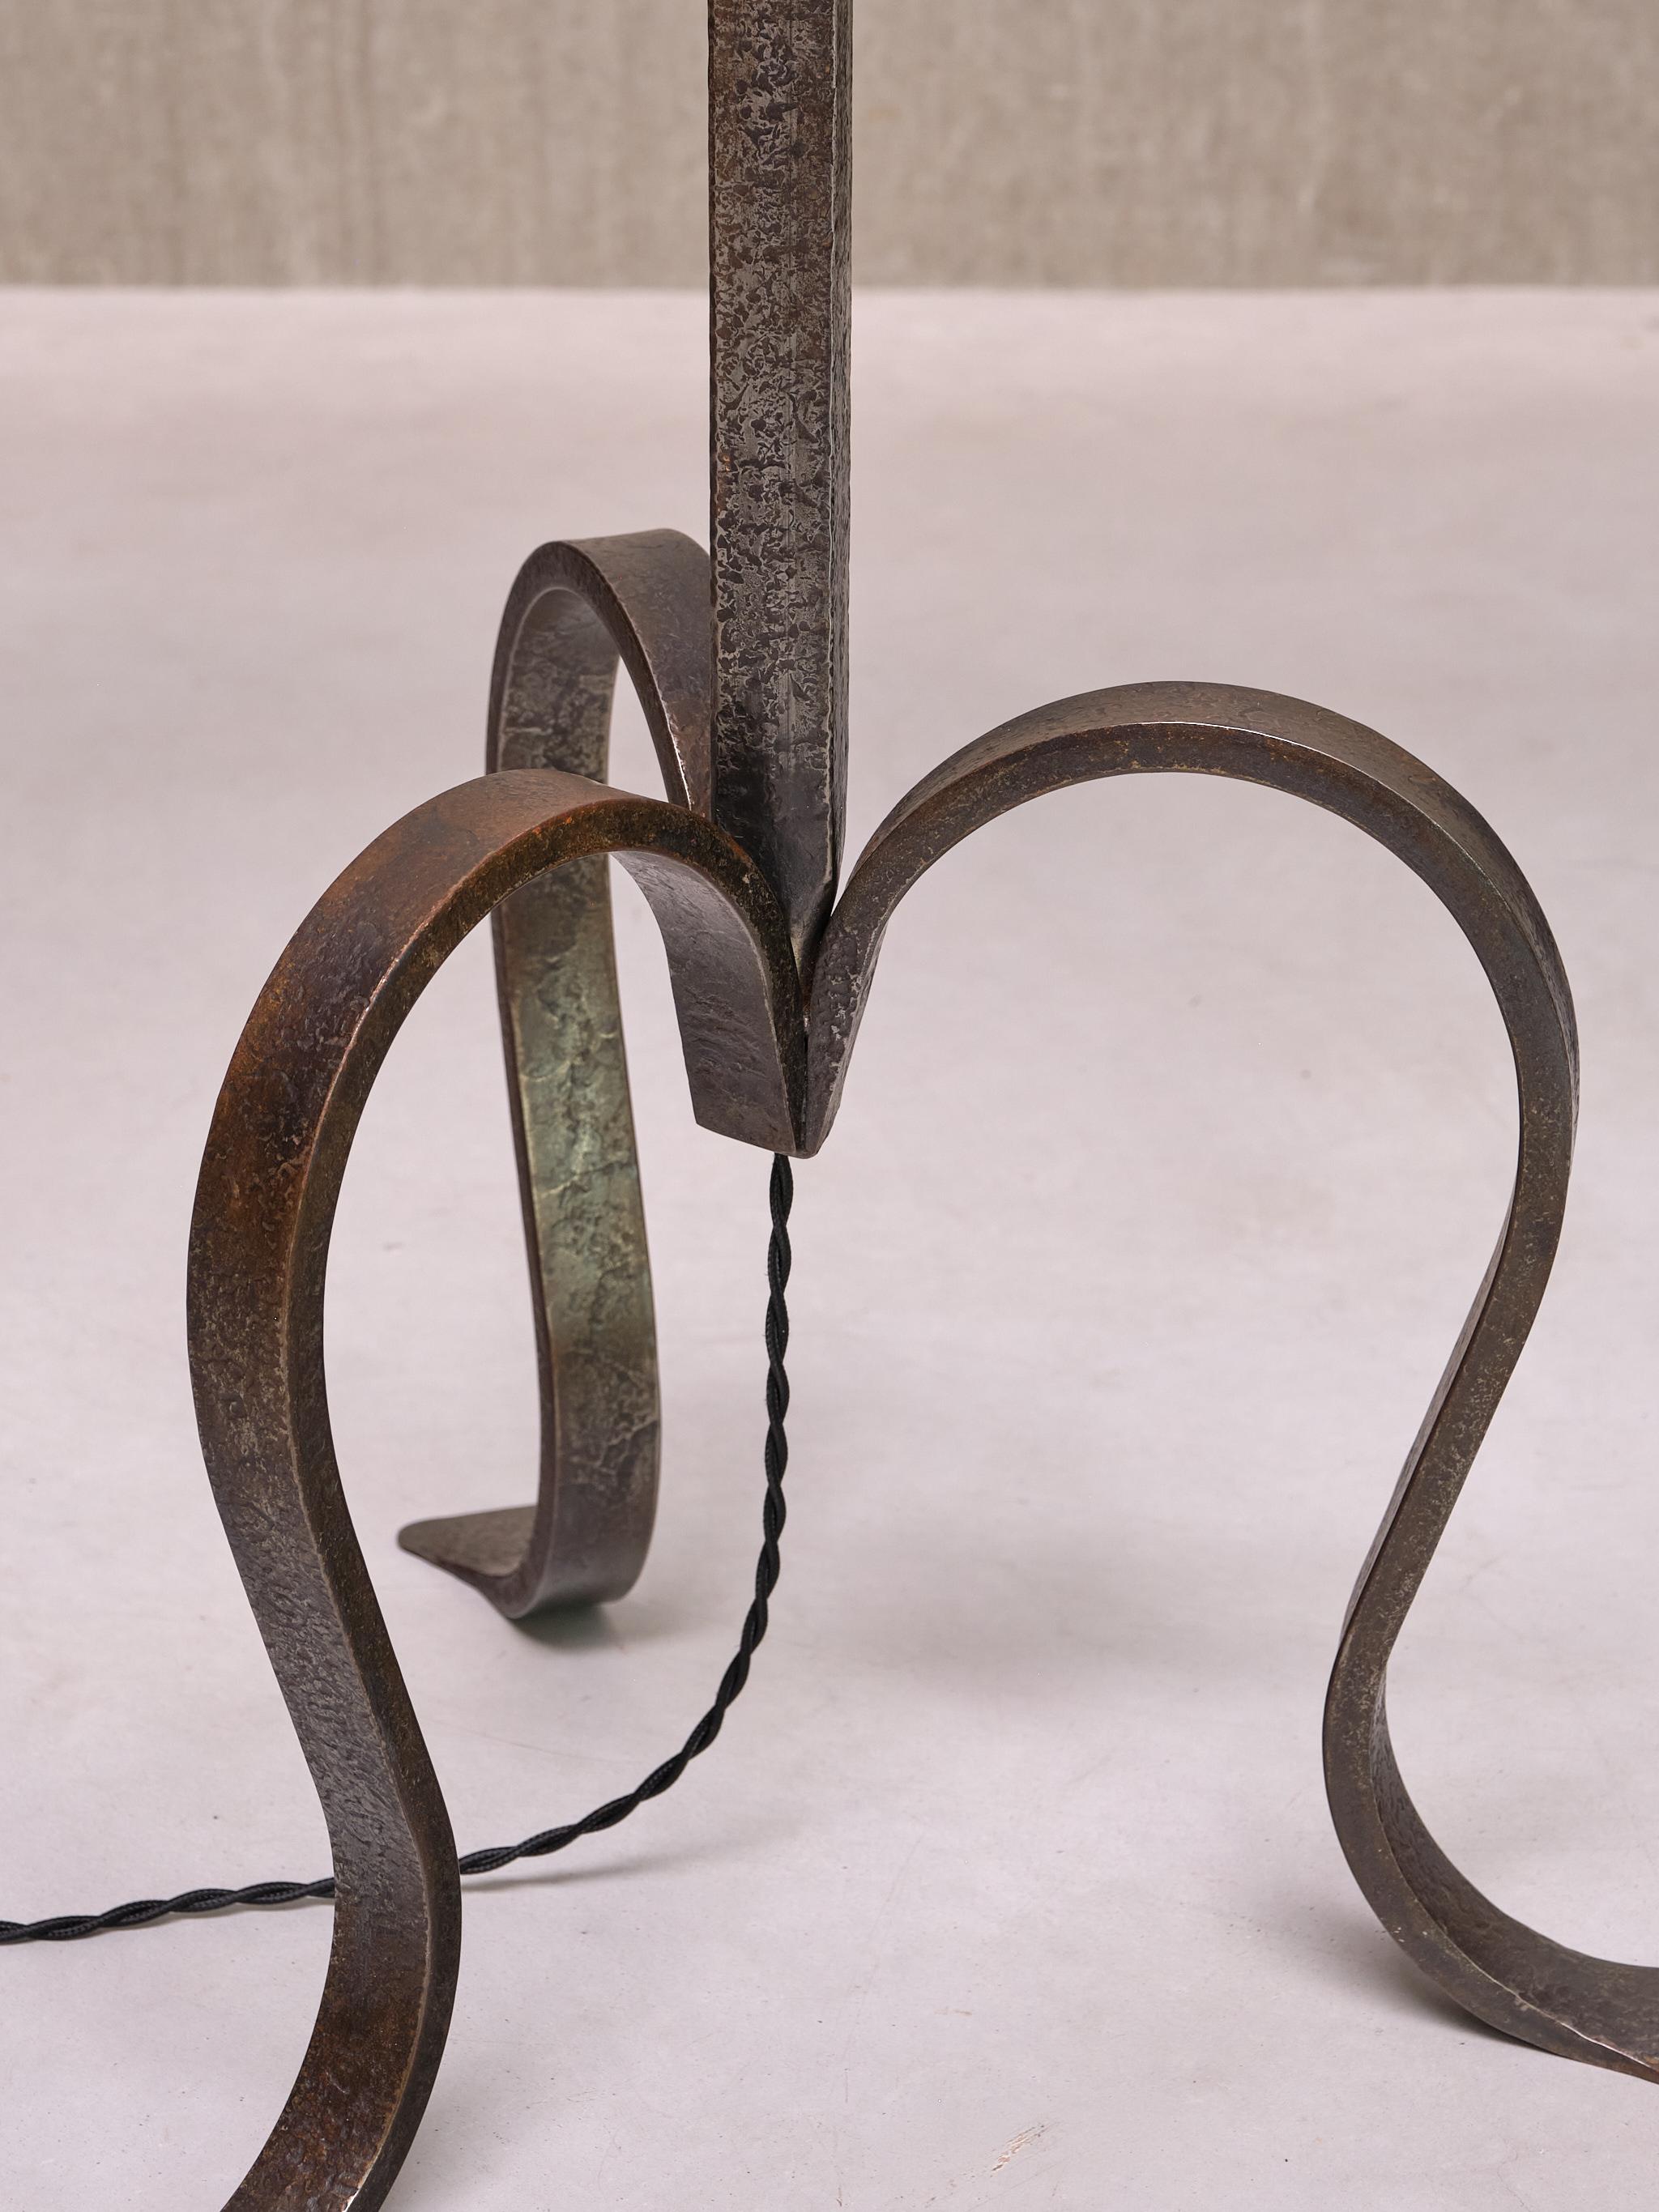 Sculptural French Modern Three Legged Floor Lamp in Wrought Iron, 1950s For Sale 3